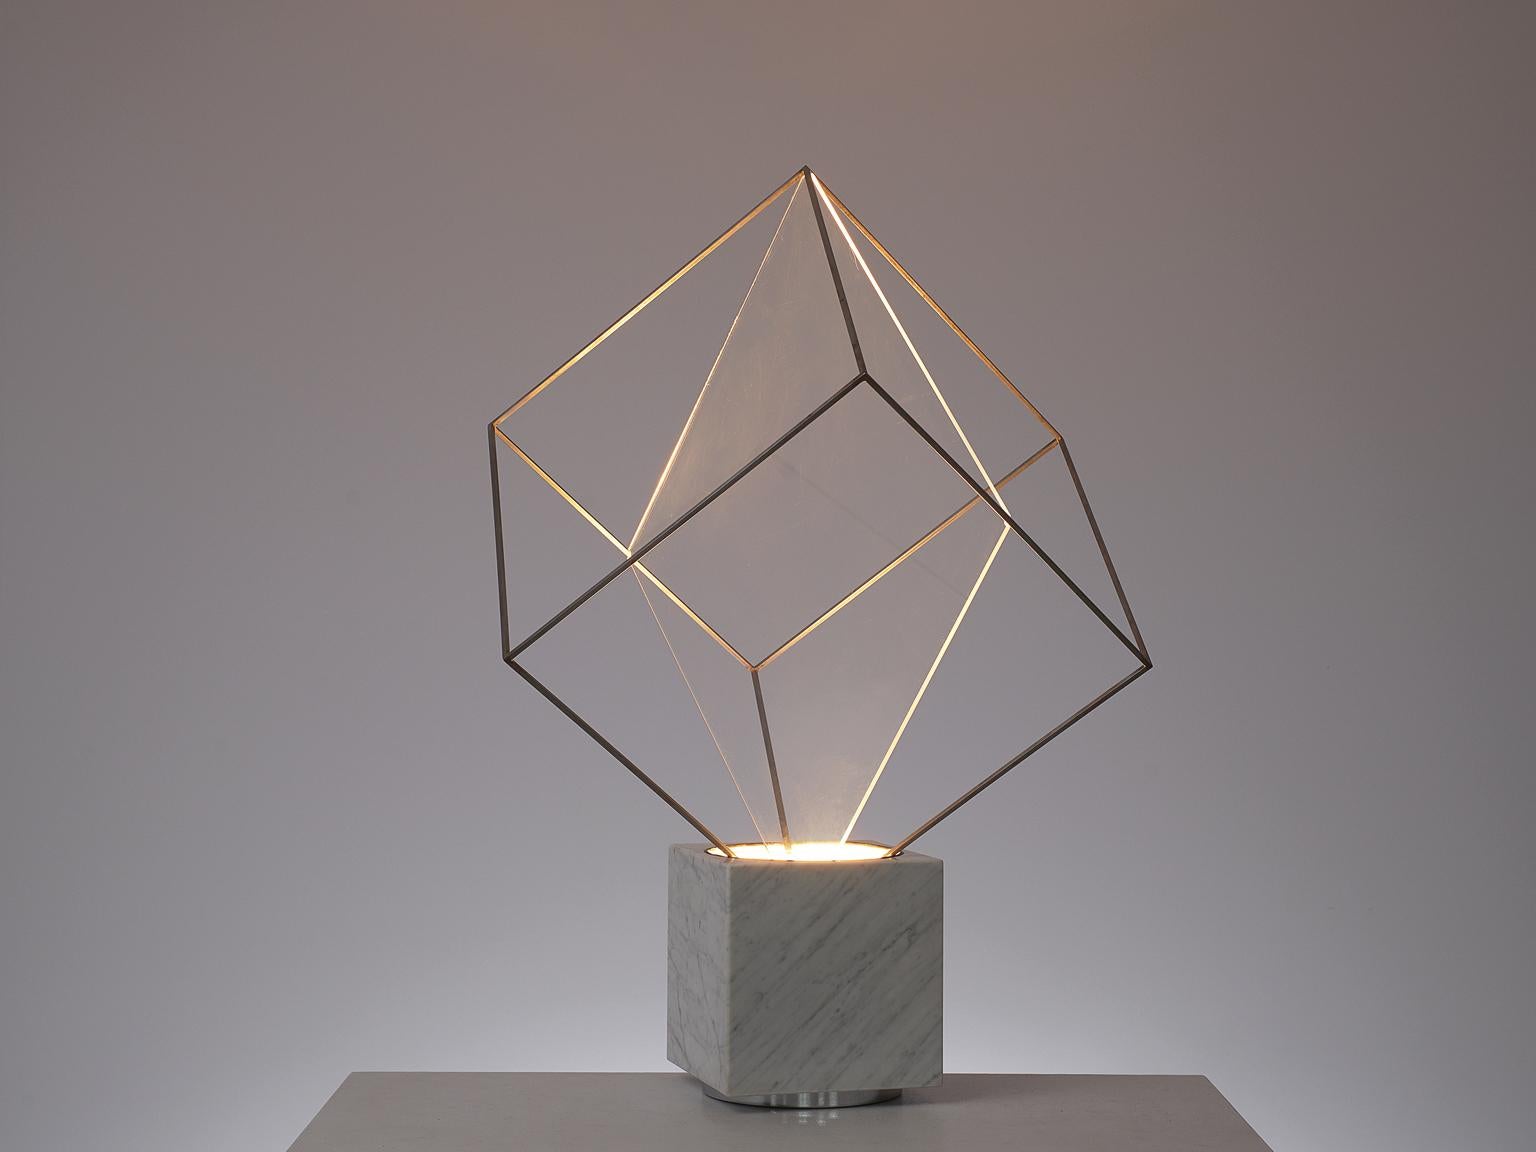 Claudio Salocchi for Lumen Form, 'Tulpa' lamp, marble, acrylic, metal, Italy, 1971.

Postmodern 'Tulpa' lamp by Claudio Salocchi. A very sculptural piece, featuring a marble base that holds a metal frame cube. An acrylic, diamond shaped plate is